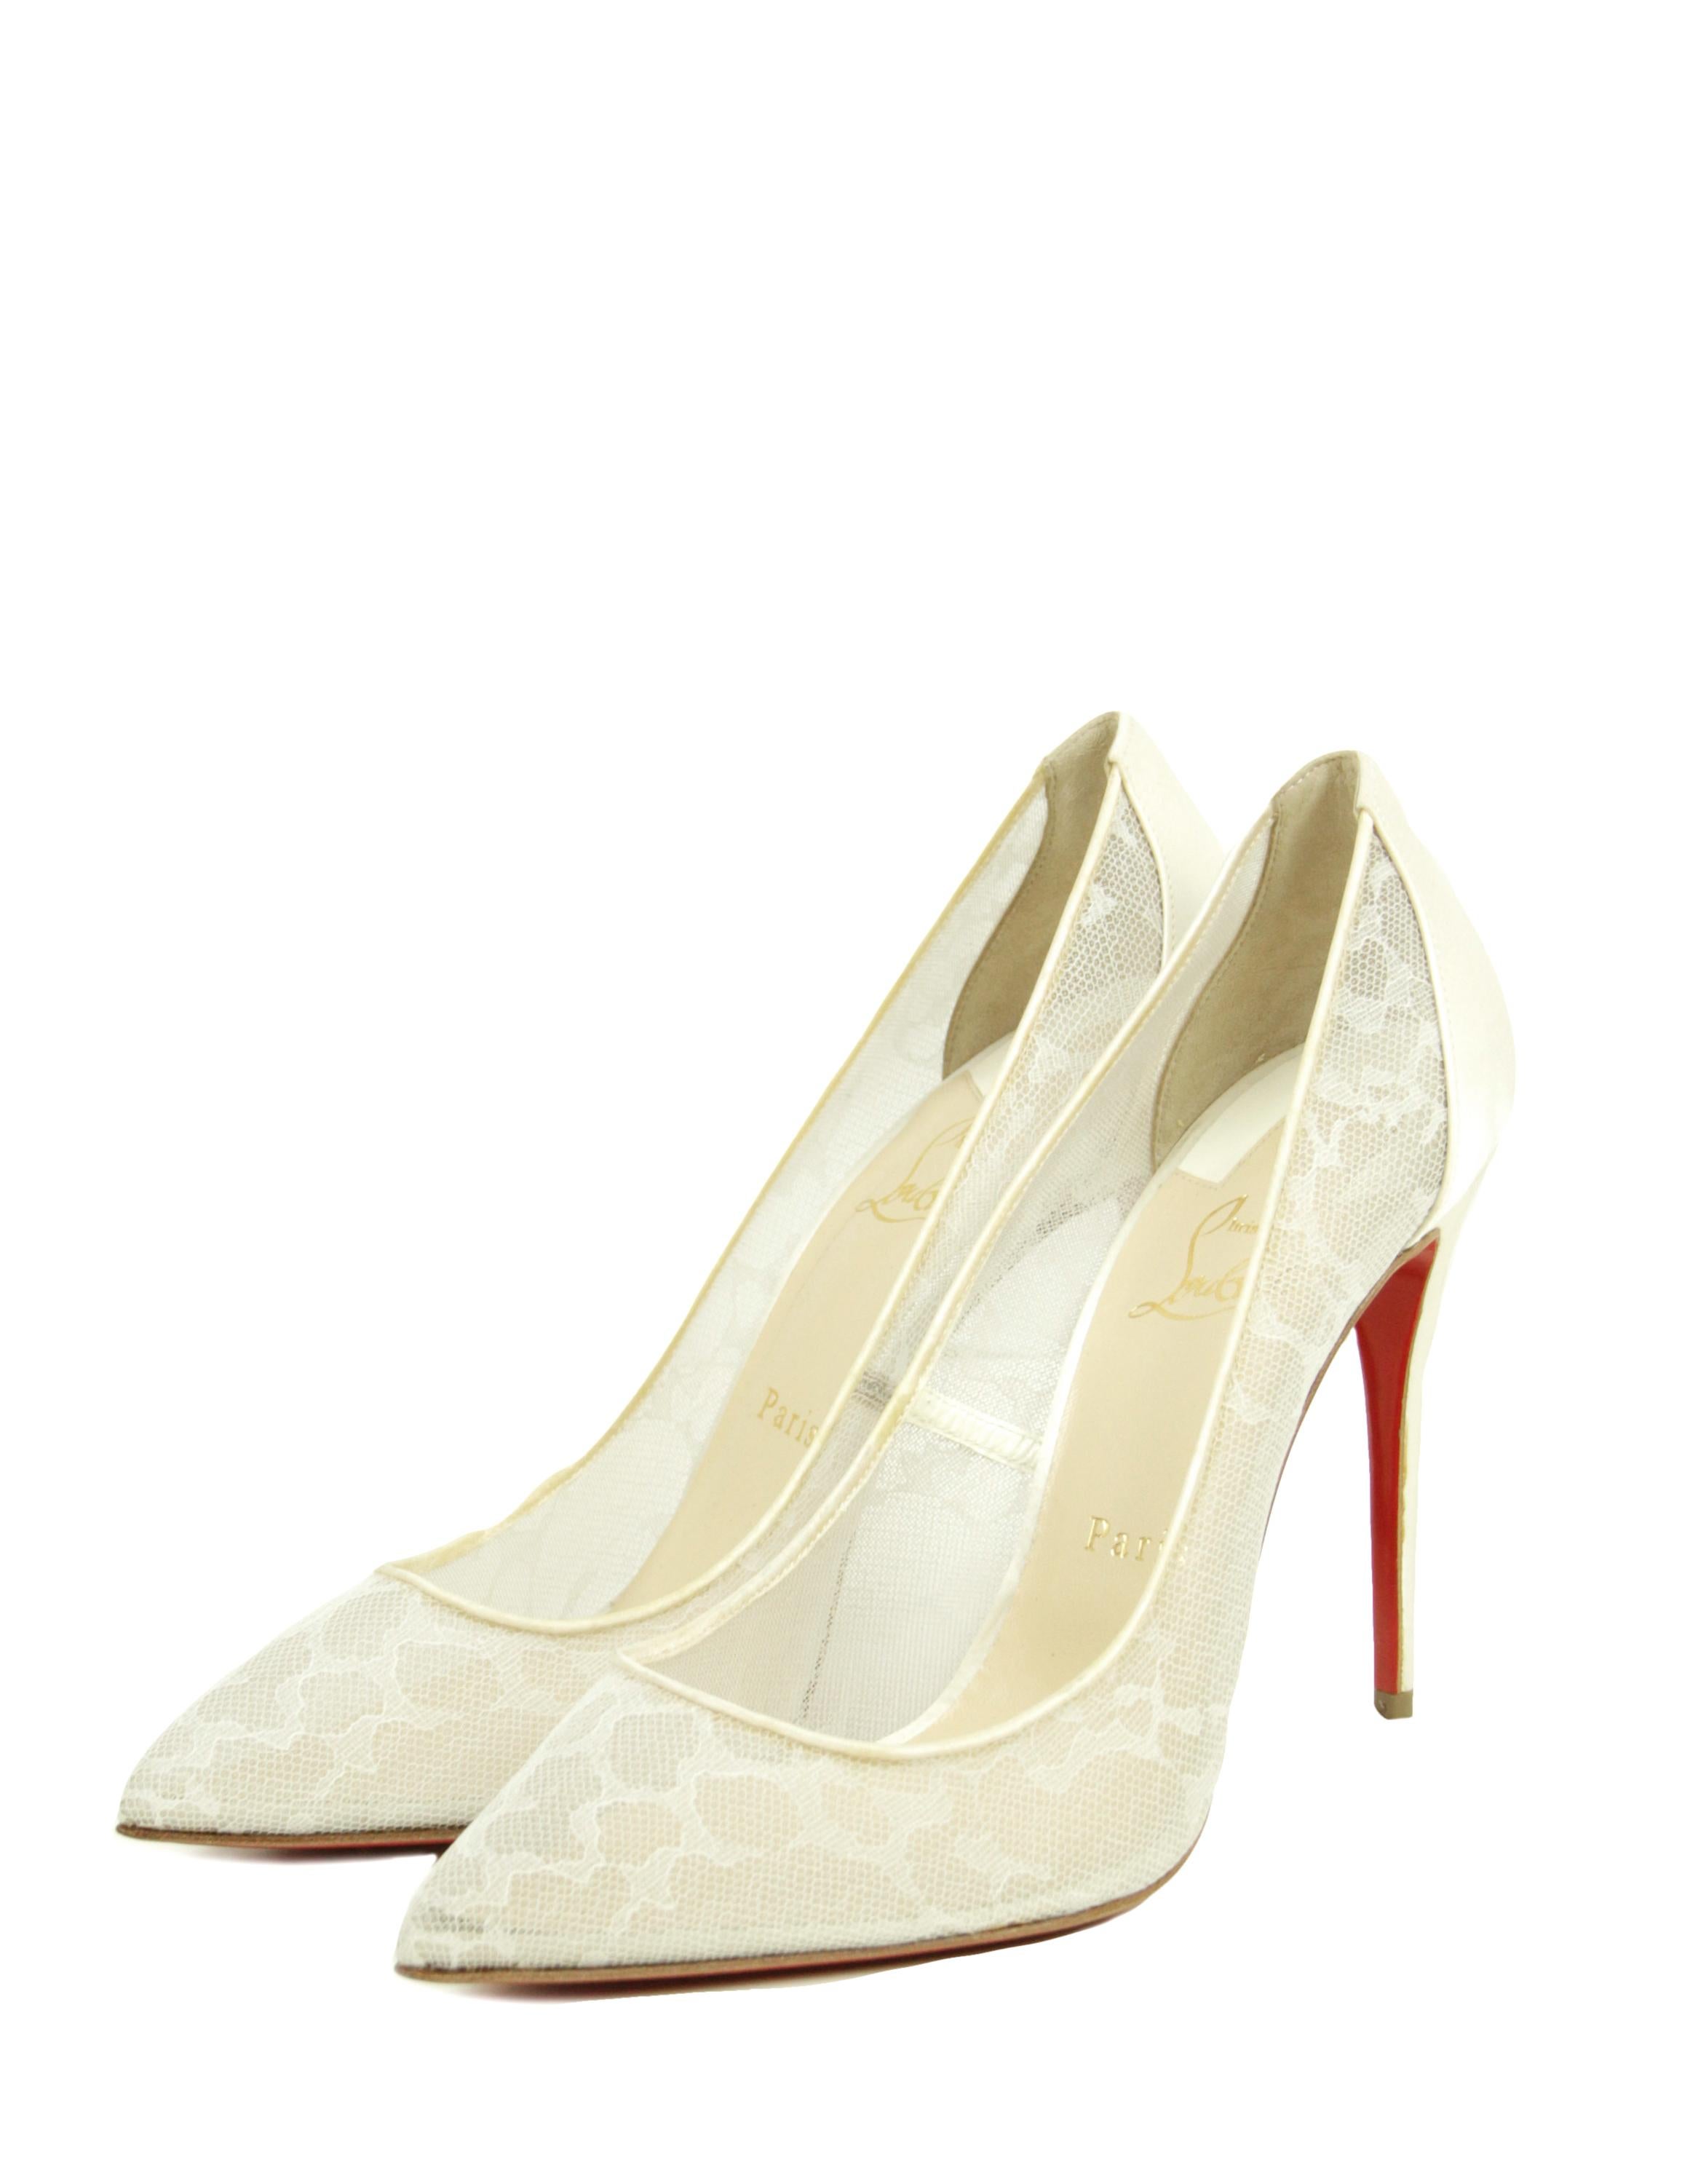 Christian Louboutin Champagne Lace/ Satin Point Toe Pumps sz 39.5

Made In: Italy
Color: Off white
Materials: Lace and satin
Overall Condition: Never worn.  Light stains to back heels from improper storage.  
Includes: Christian Louboutin dust